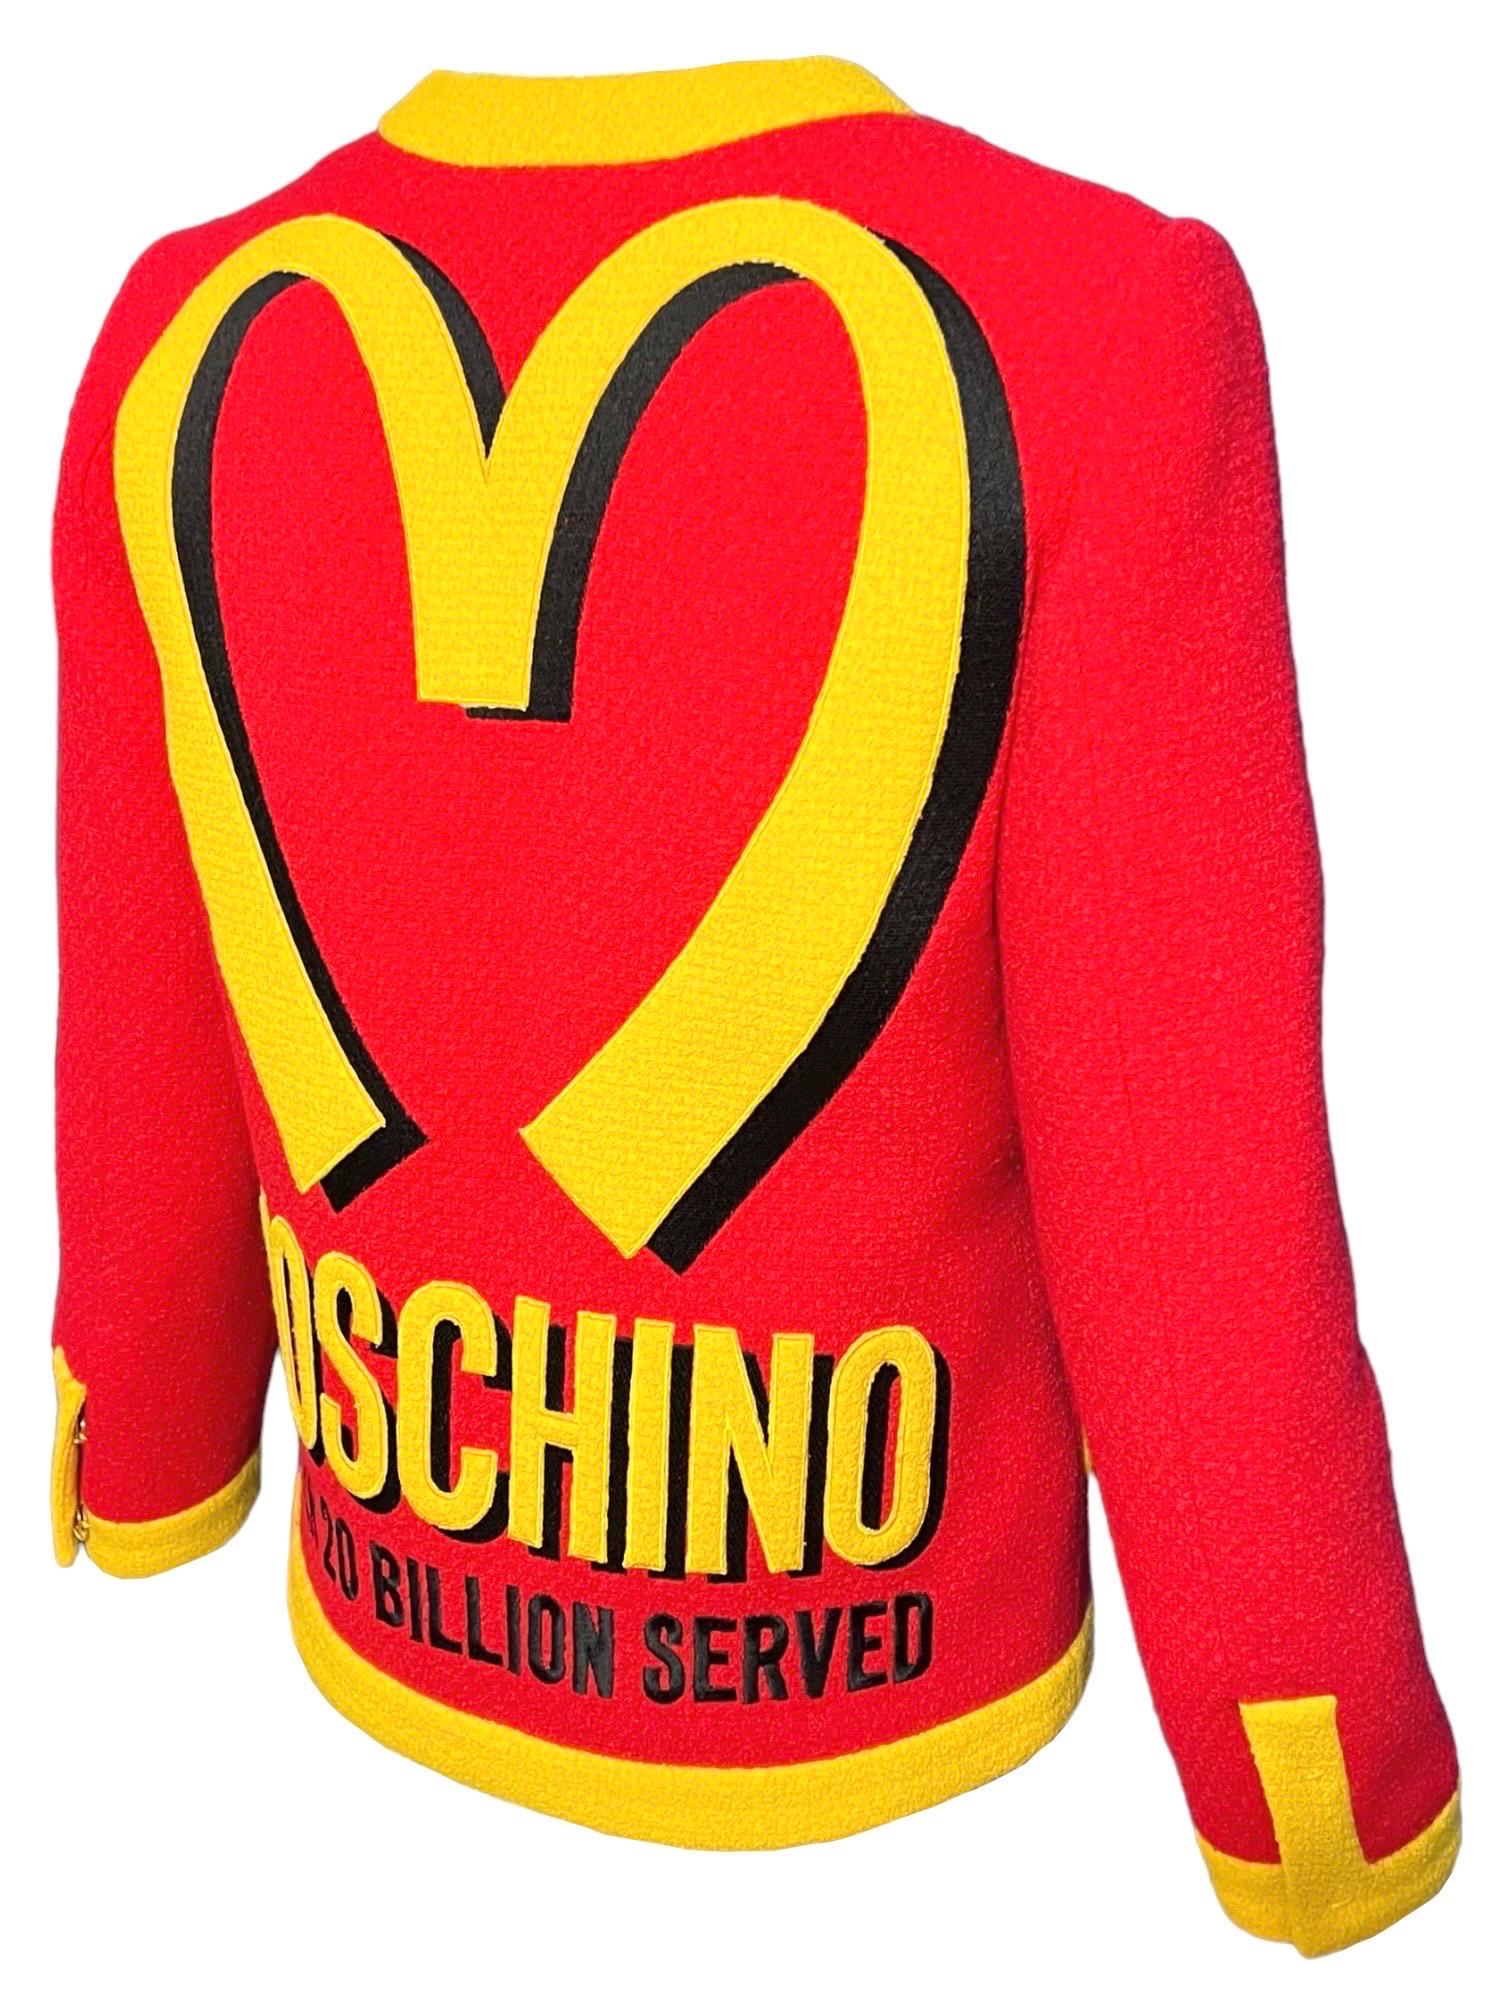 Moschino Couture McDonalds Runway Tweed Blazer F/W 2014 For Sale 2